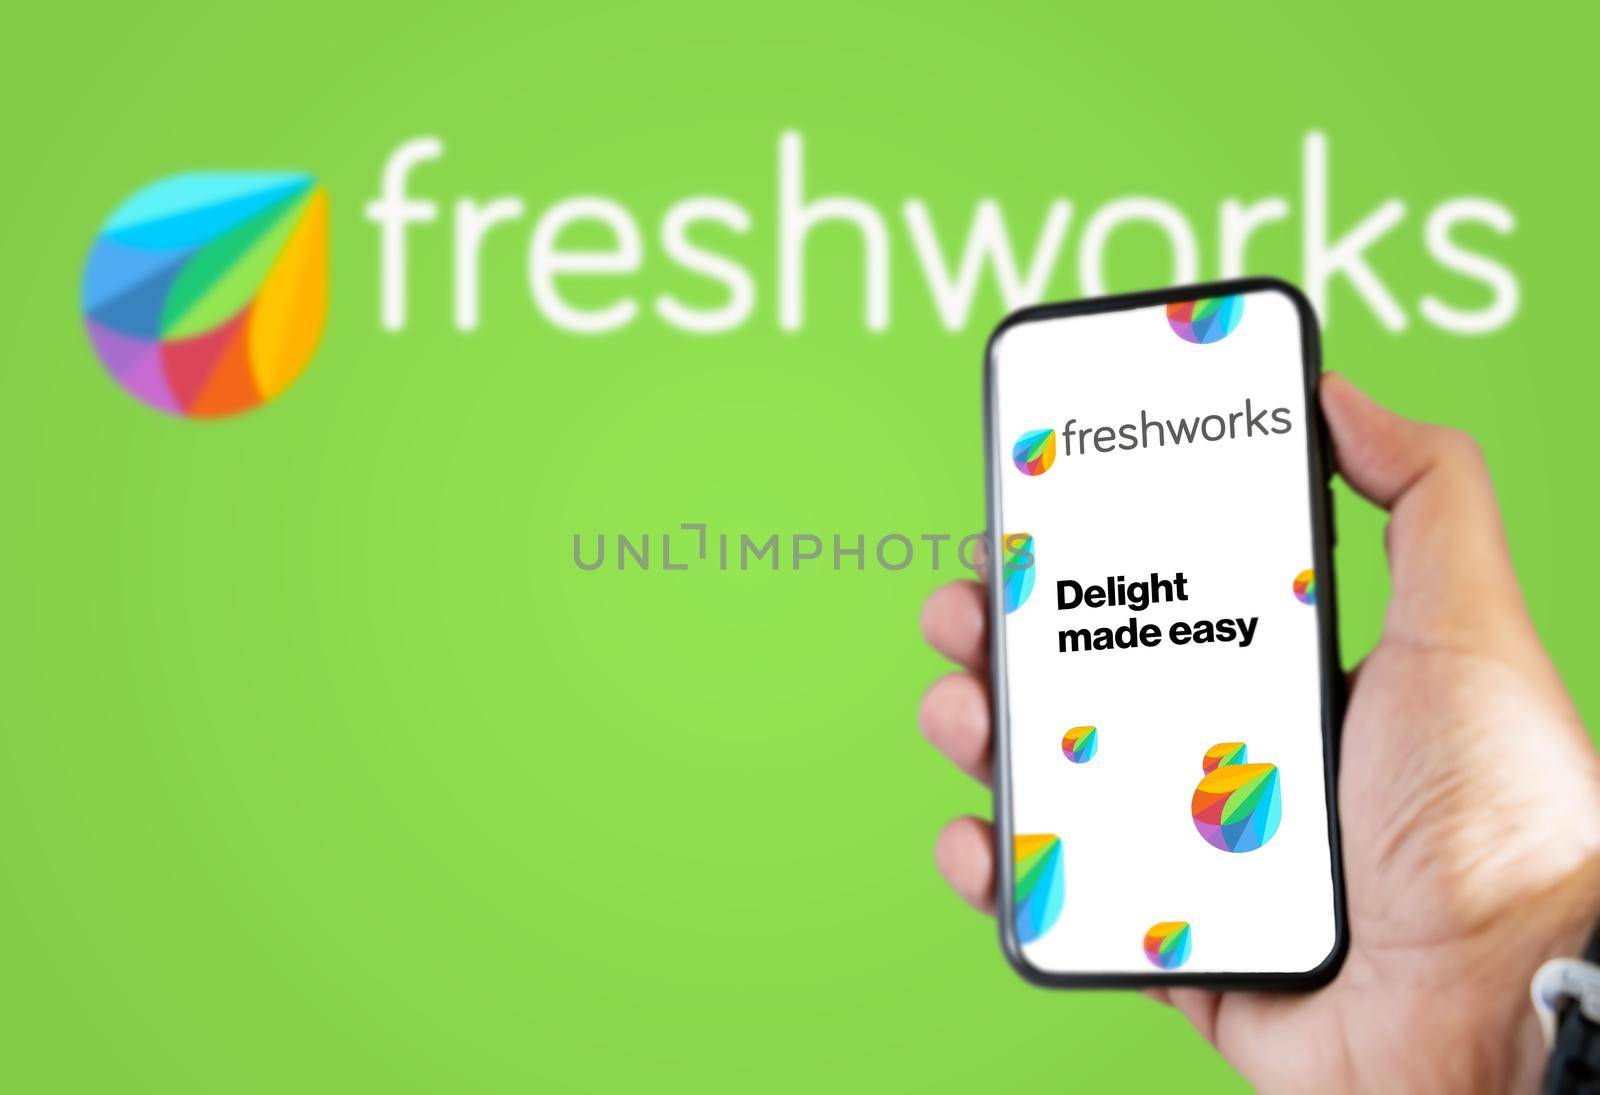 San Francisco, USA, December 2021: Hand holding a phone with Freshworks mobile application on the screen. Freshworks logo blurred on a green background. Software as a service platform company